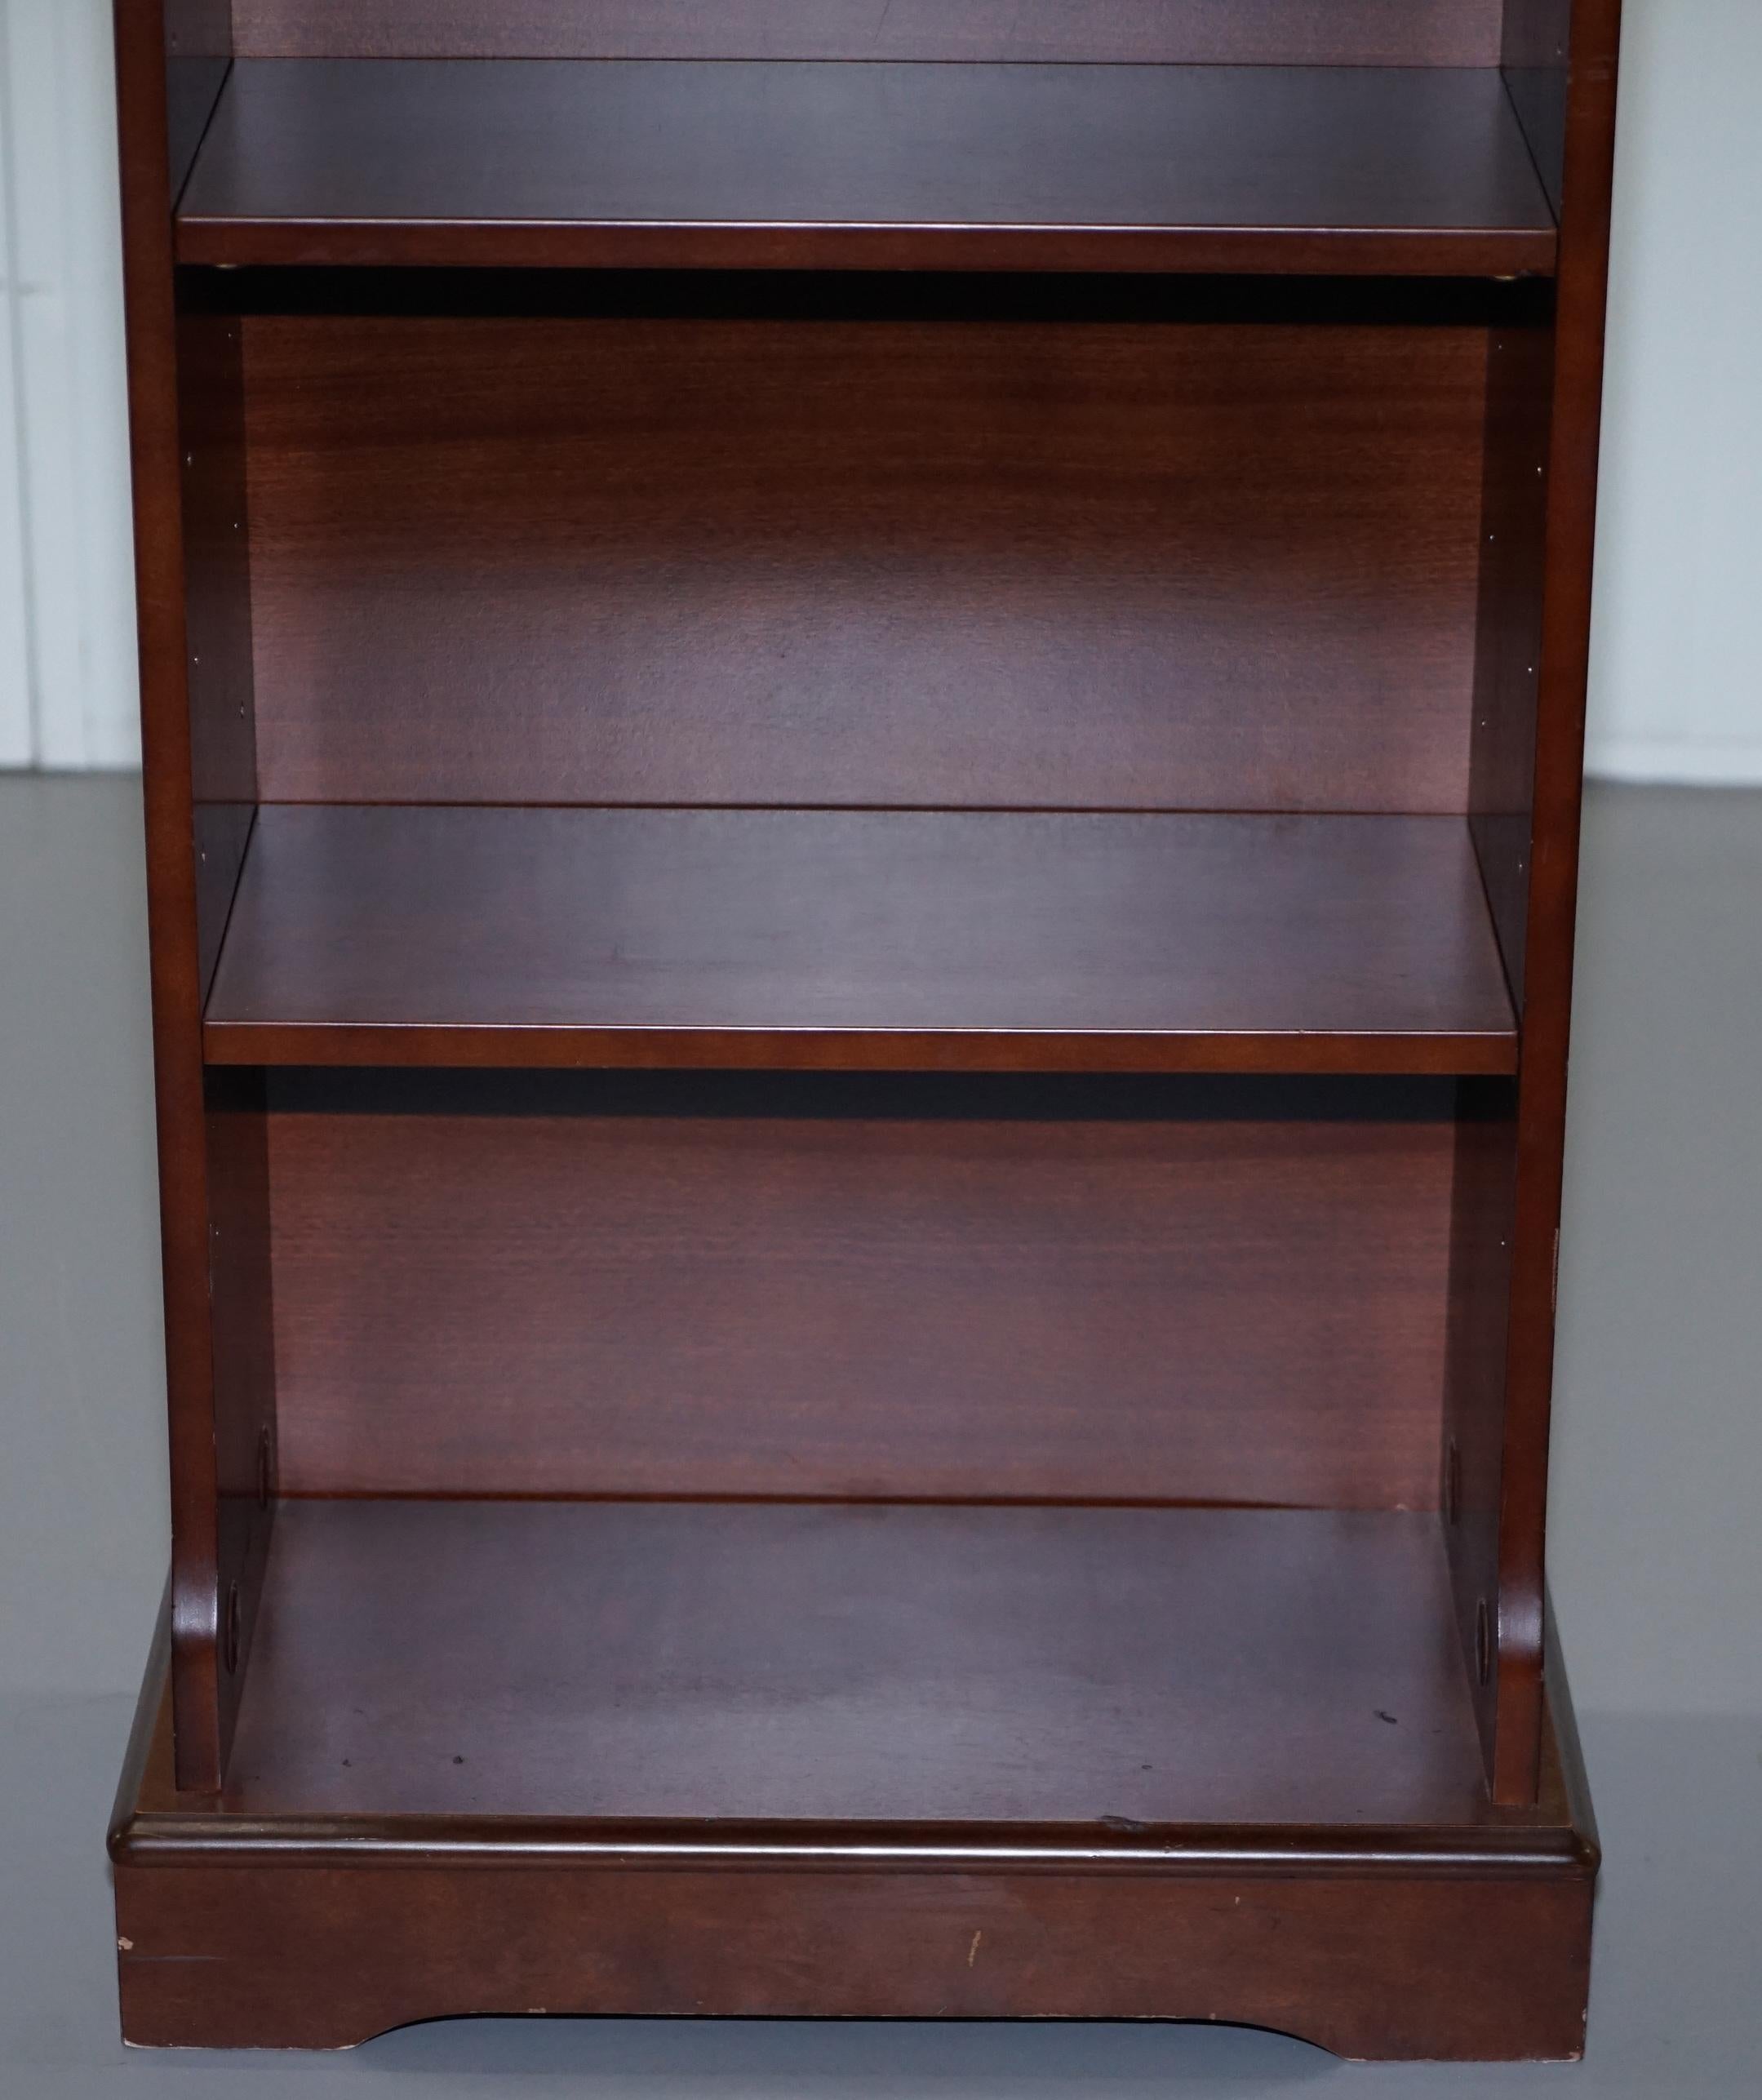 20th Century Lovely Small Dwarf Open Bookcase in Mahogany Finish with Sheraton Inlaid Top